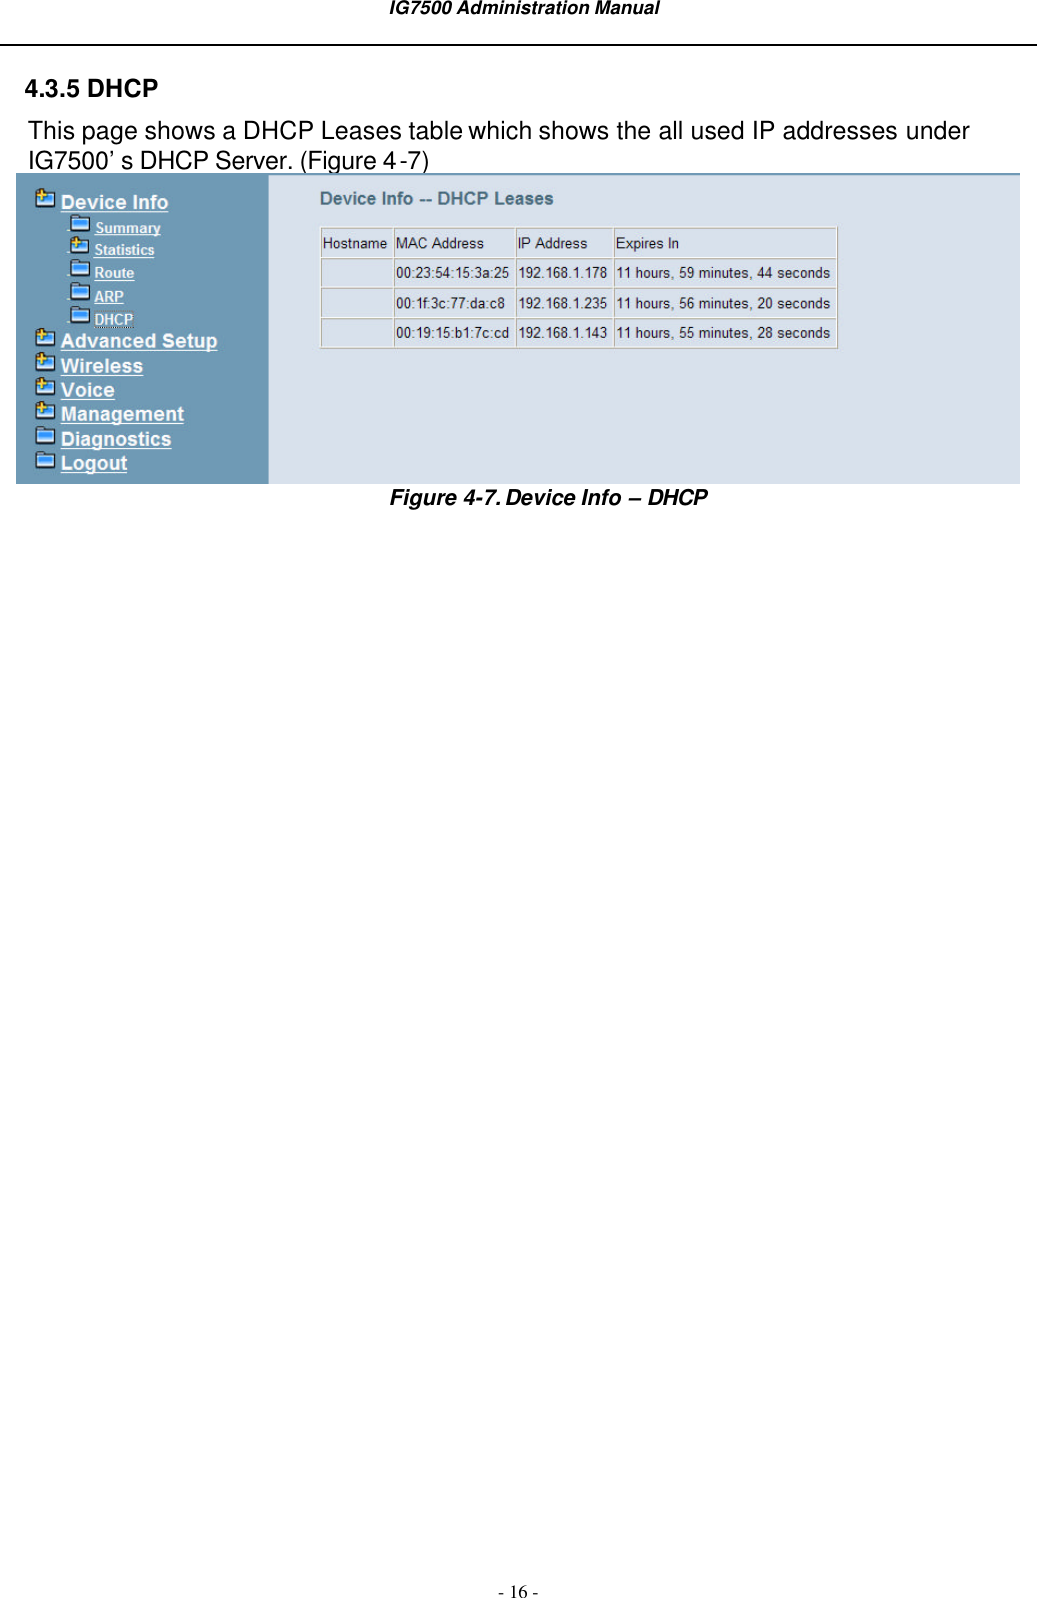  IG7500 Administration Manual  - 16 - 4.3.5 DHCP This page shows a DHCP Leases table which shows the all used IP addresses under IG7500’s DHCP Server. (Figure 4-7)  Figure 4-7. Device Info – DHCP 